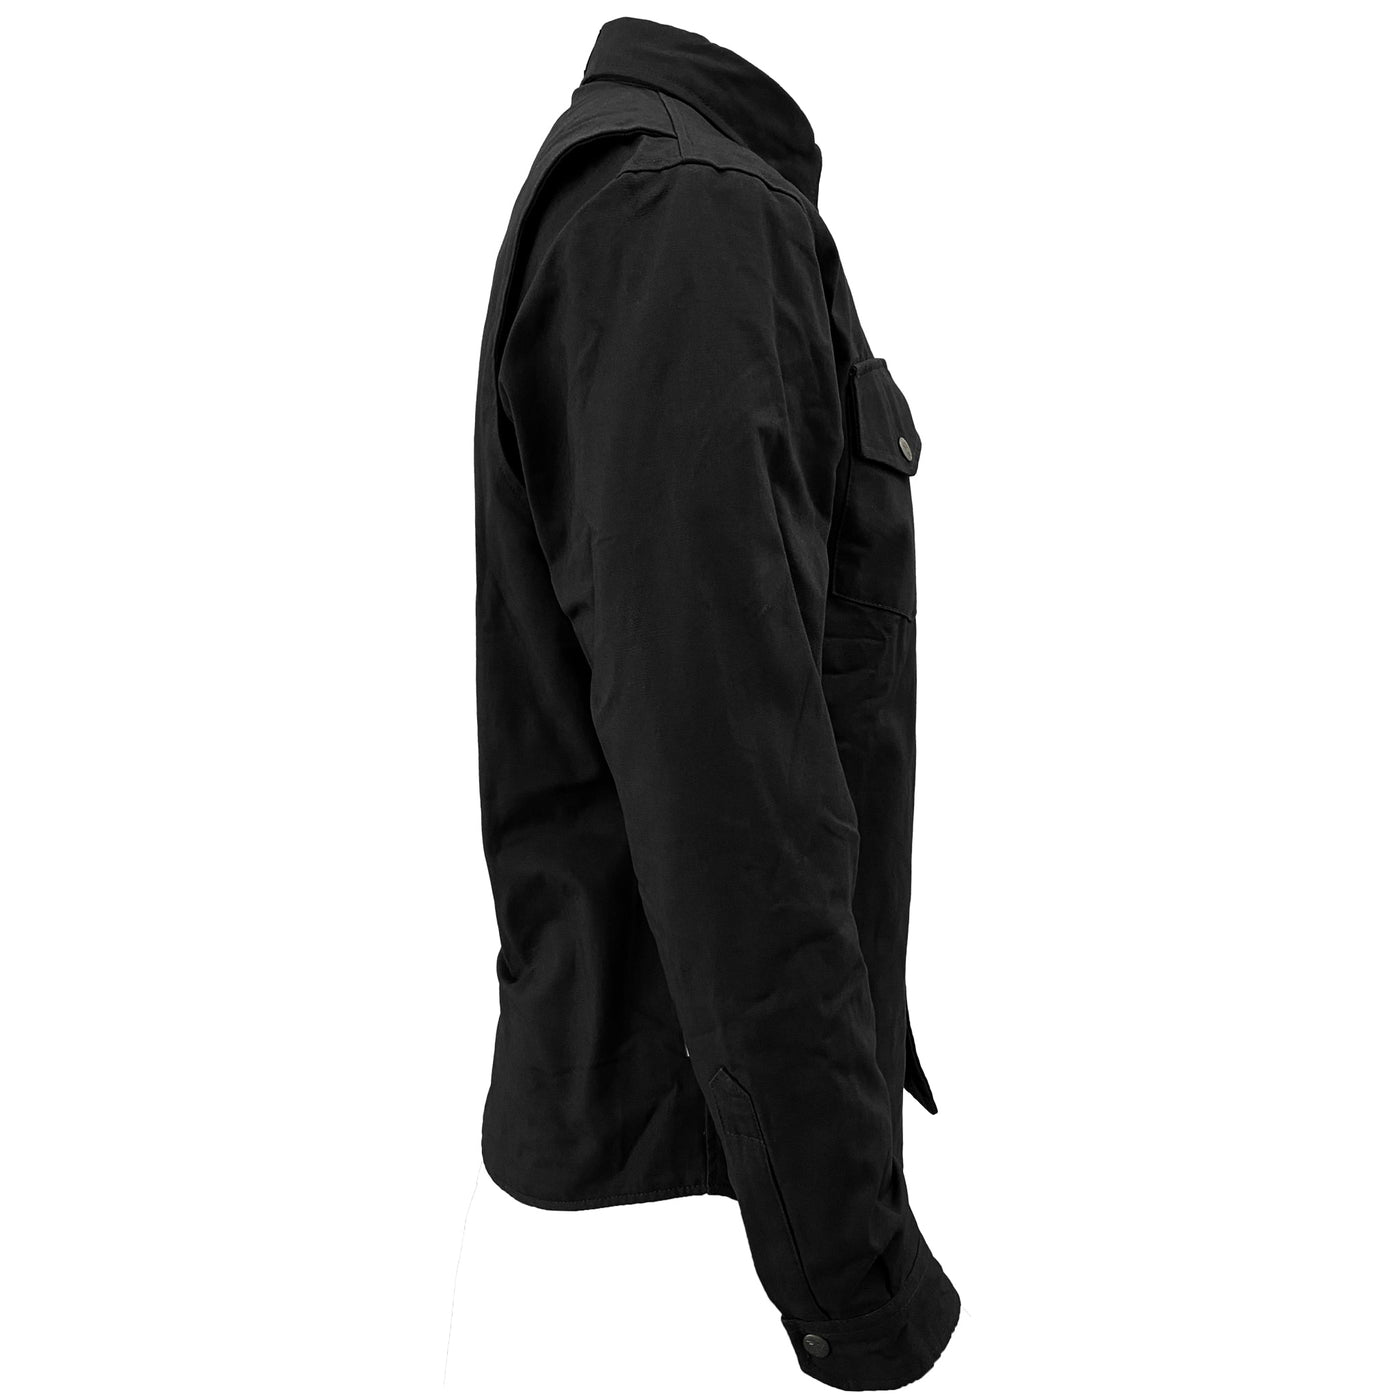 Protective Canvas Jacket with Pads for Men - Black Solid